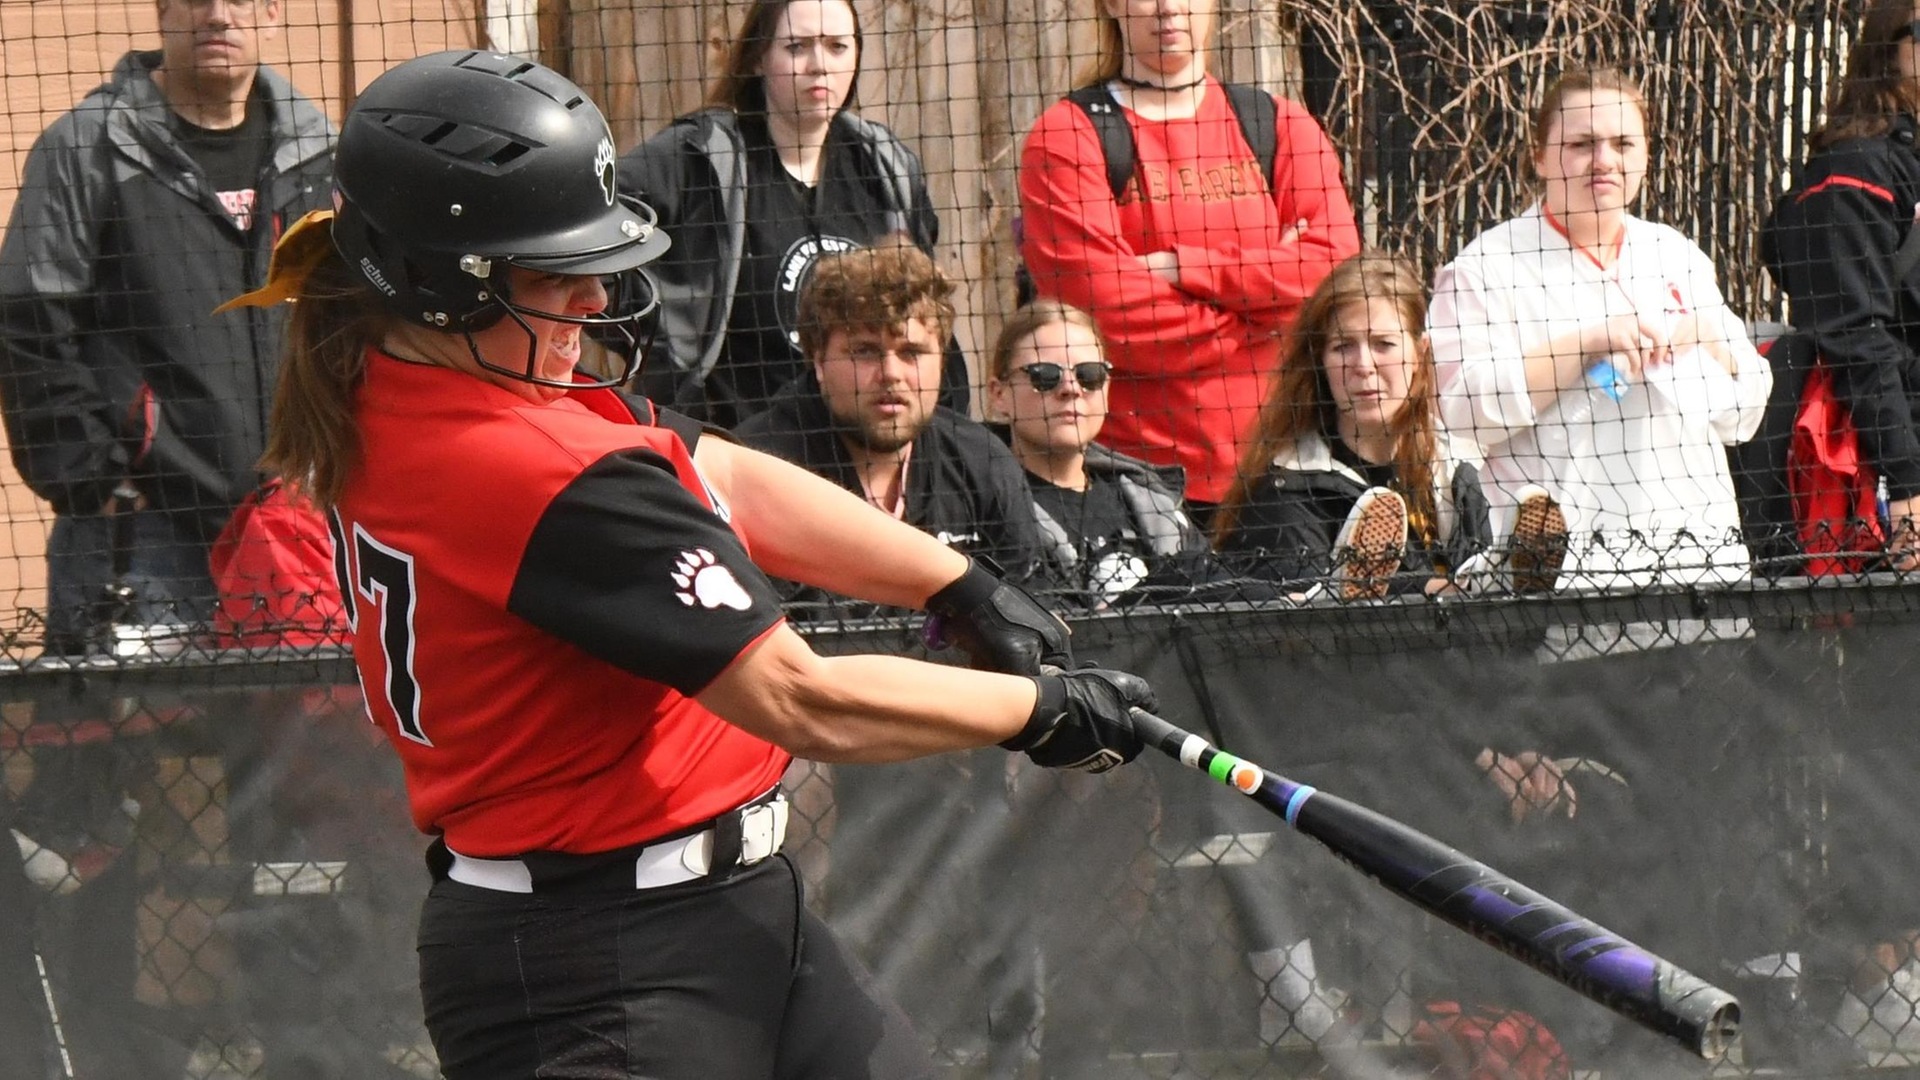 Foresters Split Twinbill with Monmouth, Handed First Conference Loss